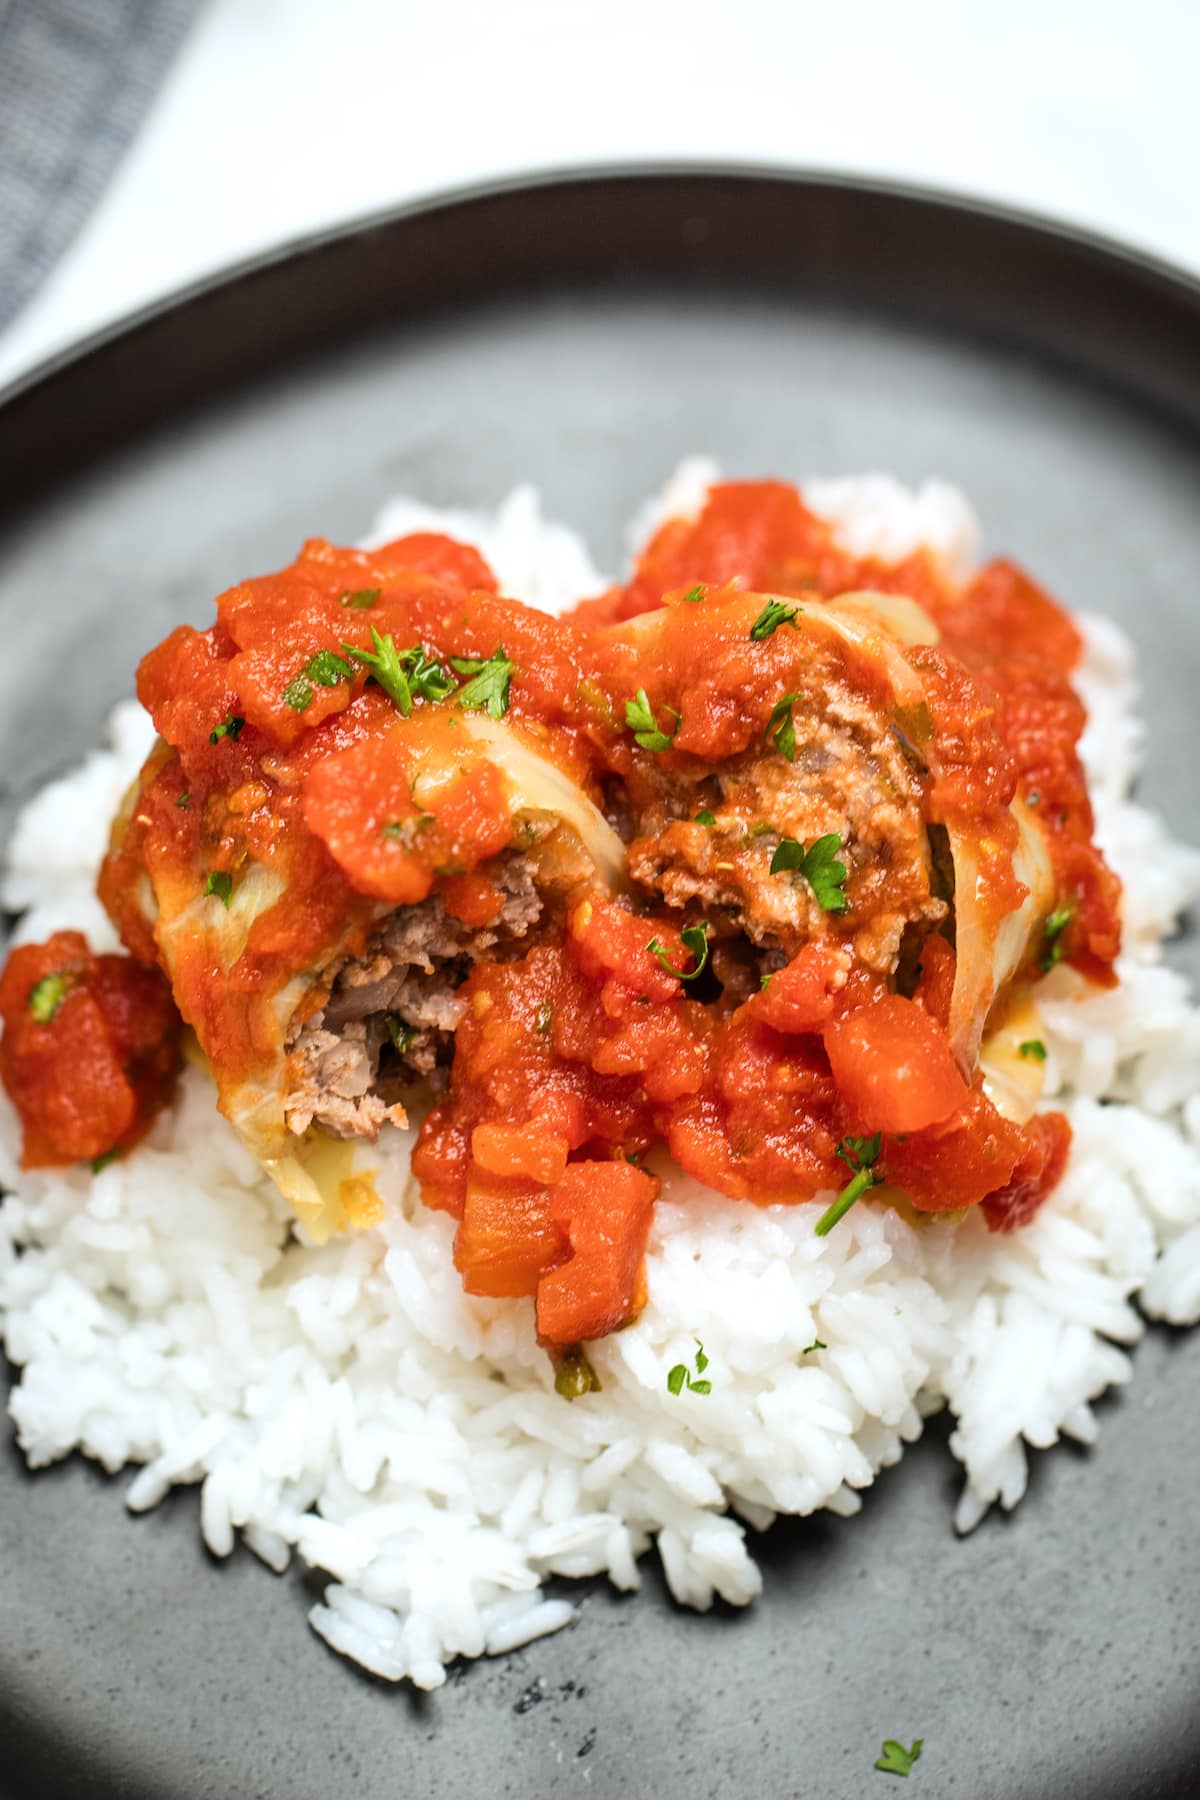 Stuffed cabbage rolls cut in half on top of rice on a plate, topped with more tomato sauce.